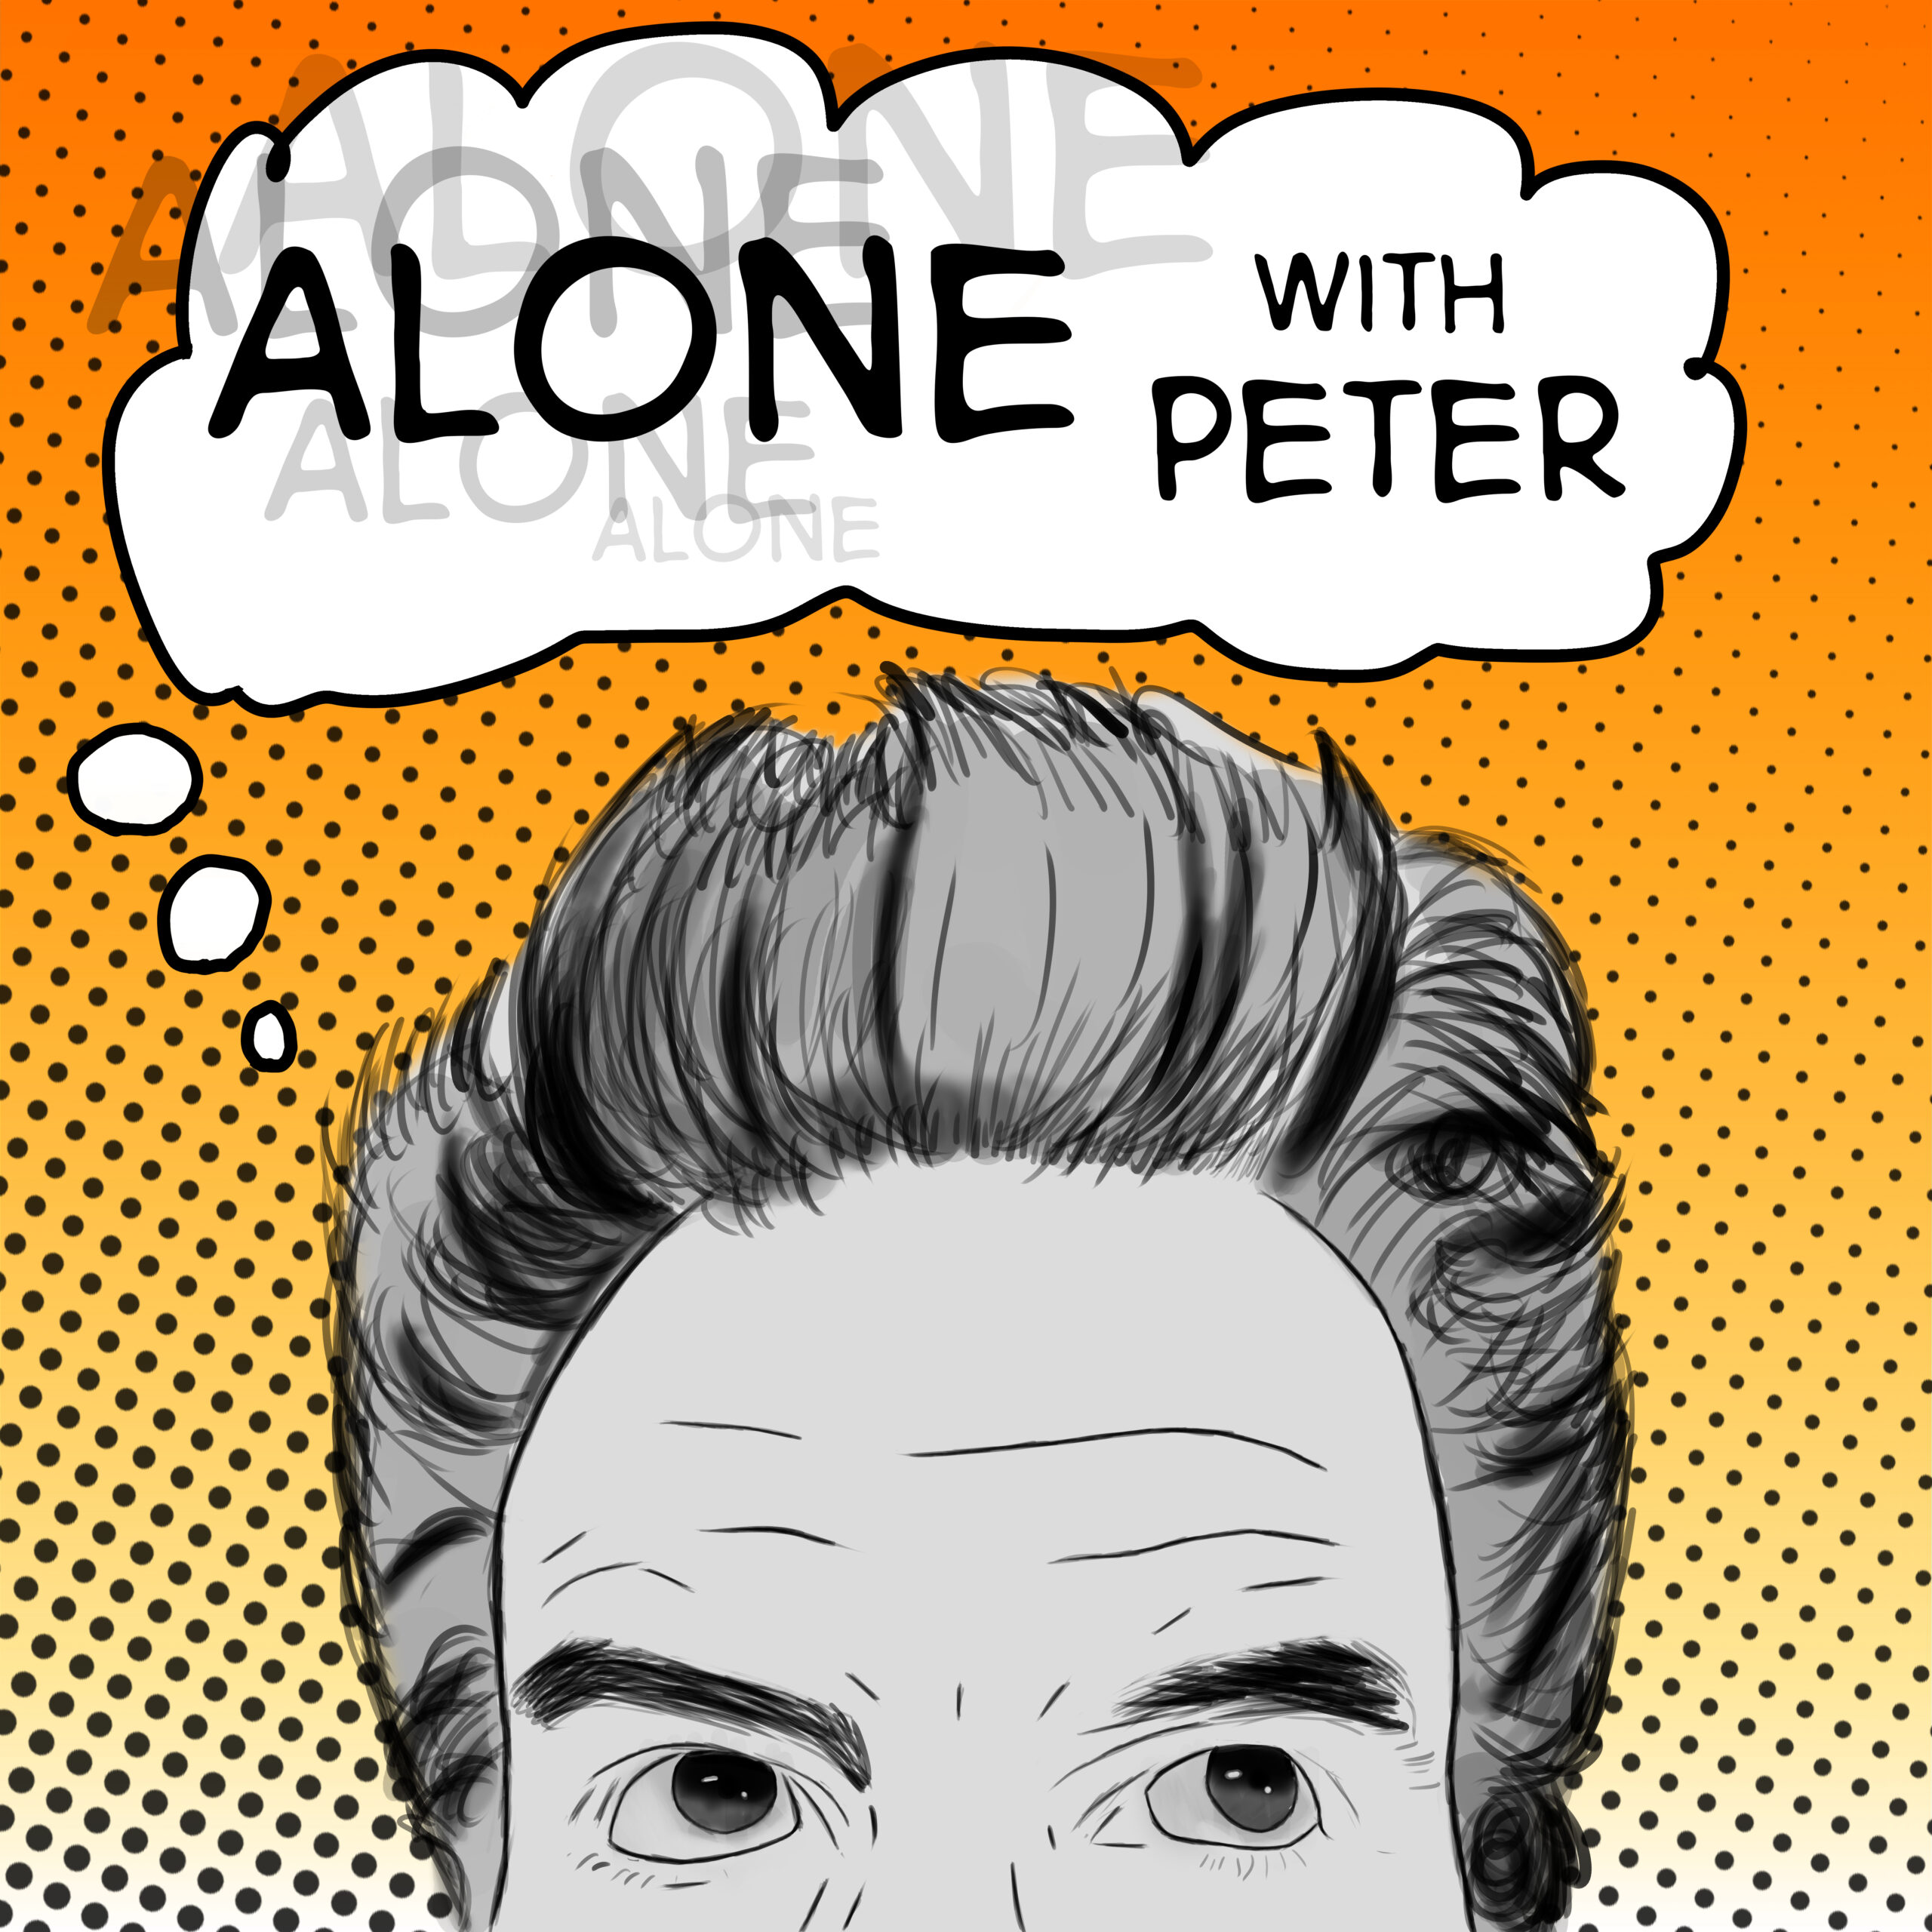 Alone With Peter - A Peter Kersting Podcast about storytelling, interviews, world travel, and productivity